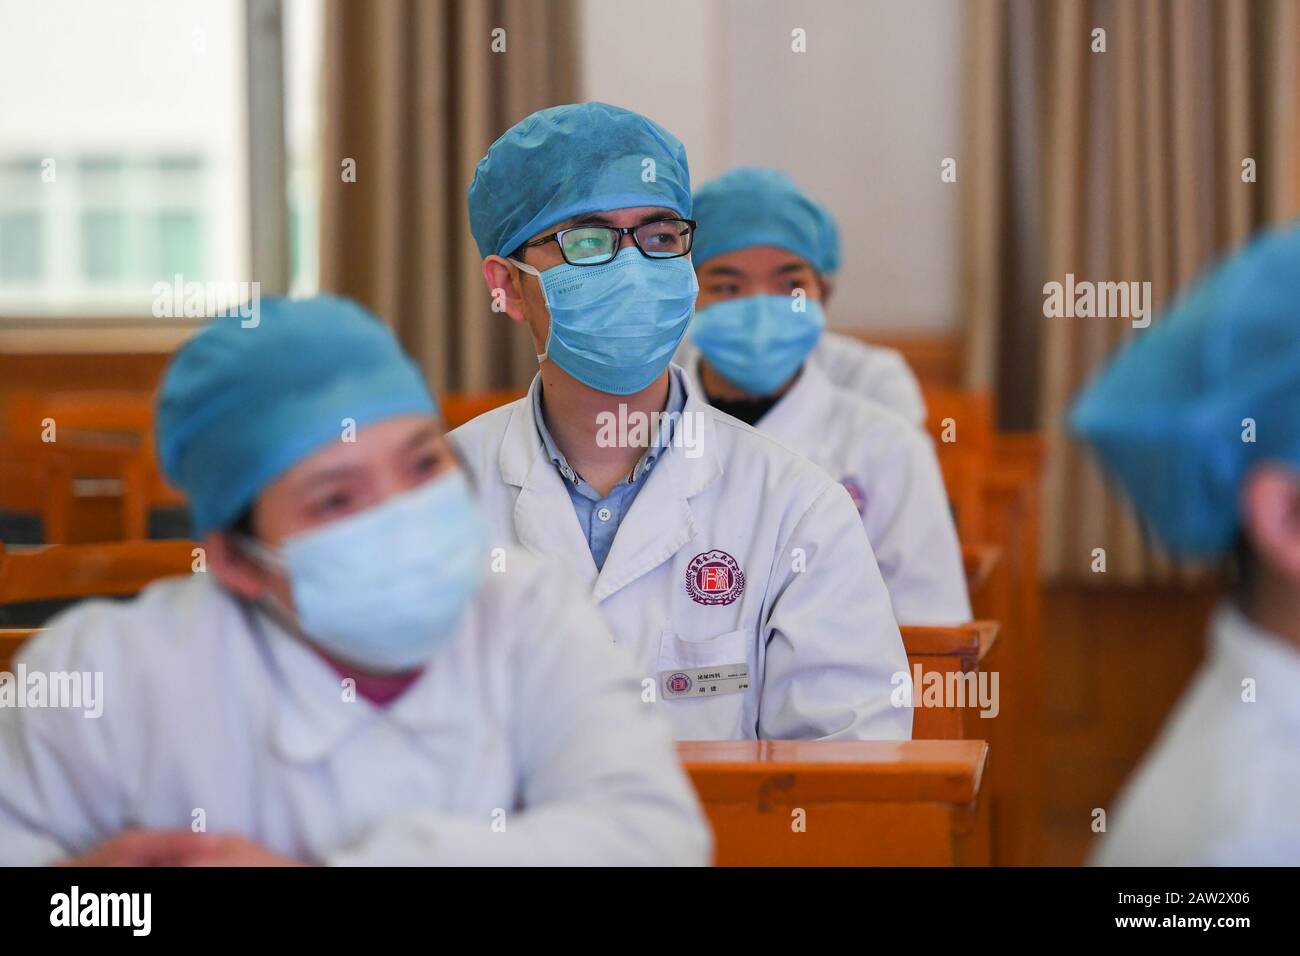 Changsha, China's Hunan Province. 6th Feb, 2020. Volunteers are seen during training courses for fighting against the novel coronavirus epidemic at Mawangdui section of People's Hospital of Hunan Province in Changsha, central China's Hunan Province, Feb. 6, 2020. The hospital on Thursday organized training courses for nurses who volunteered to join the fight against the novel coronavirus. Credit: Xinhua/Alamy Live News Stock Photo